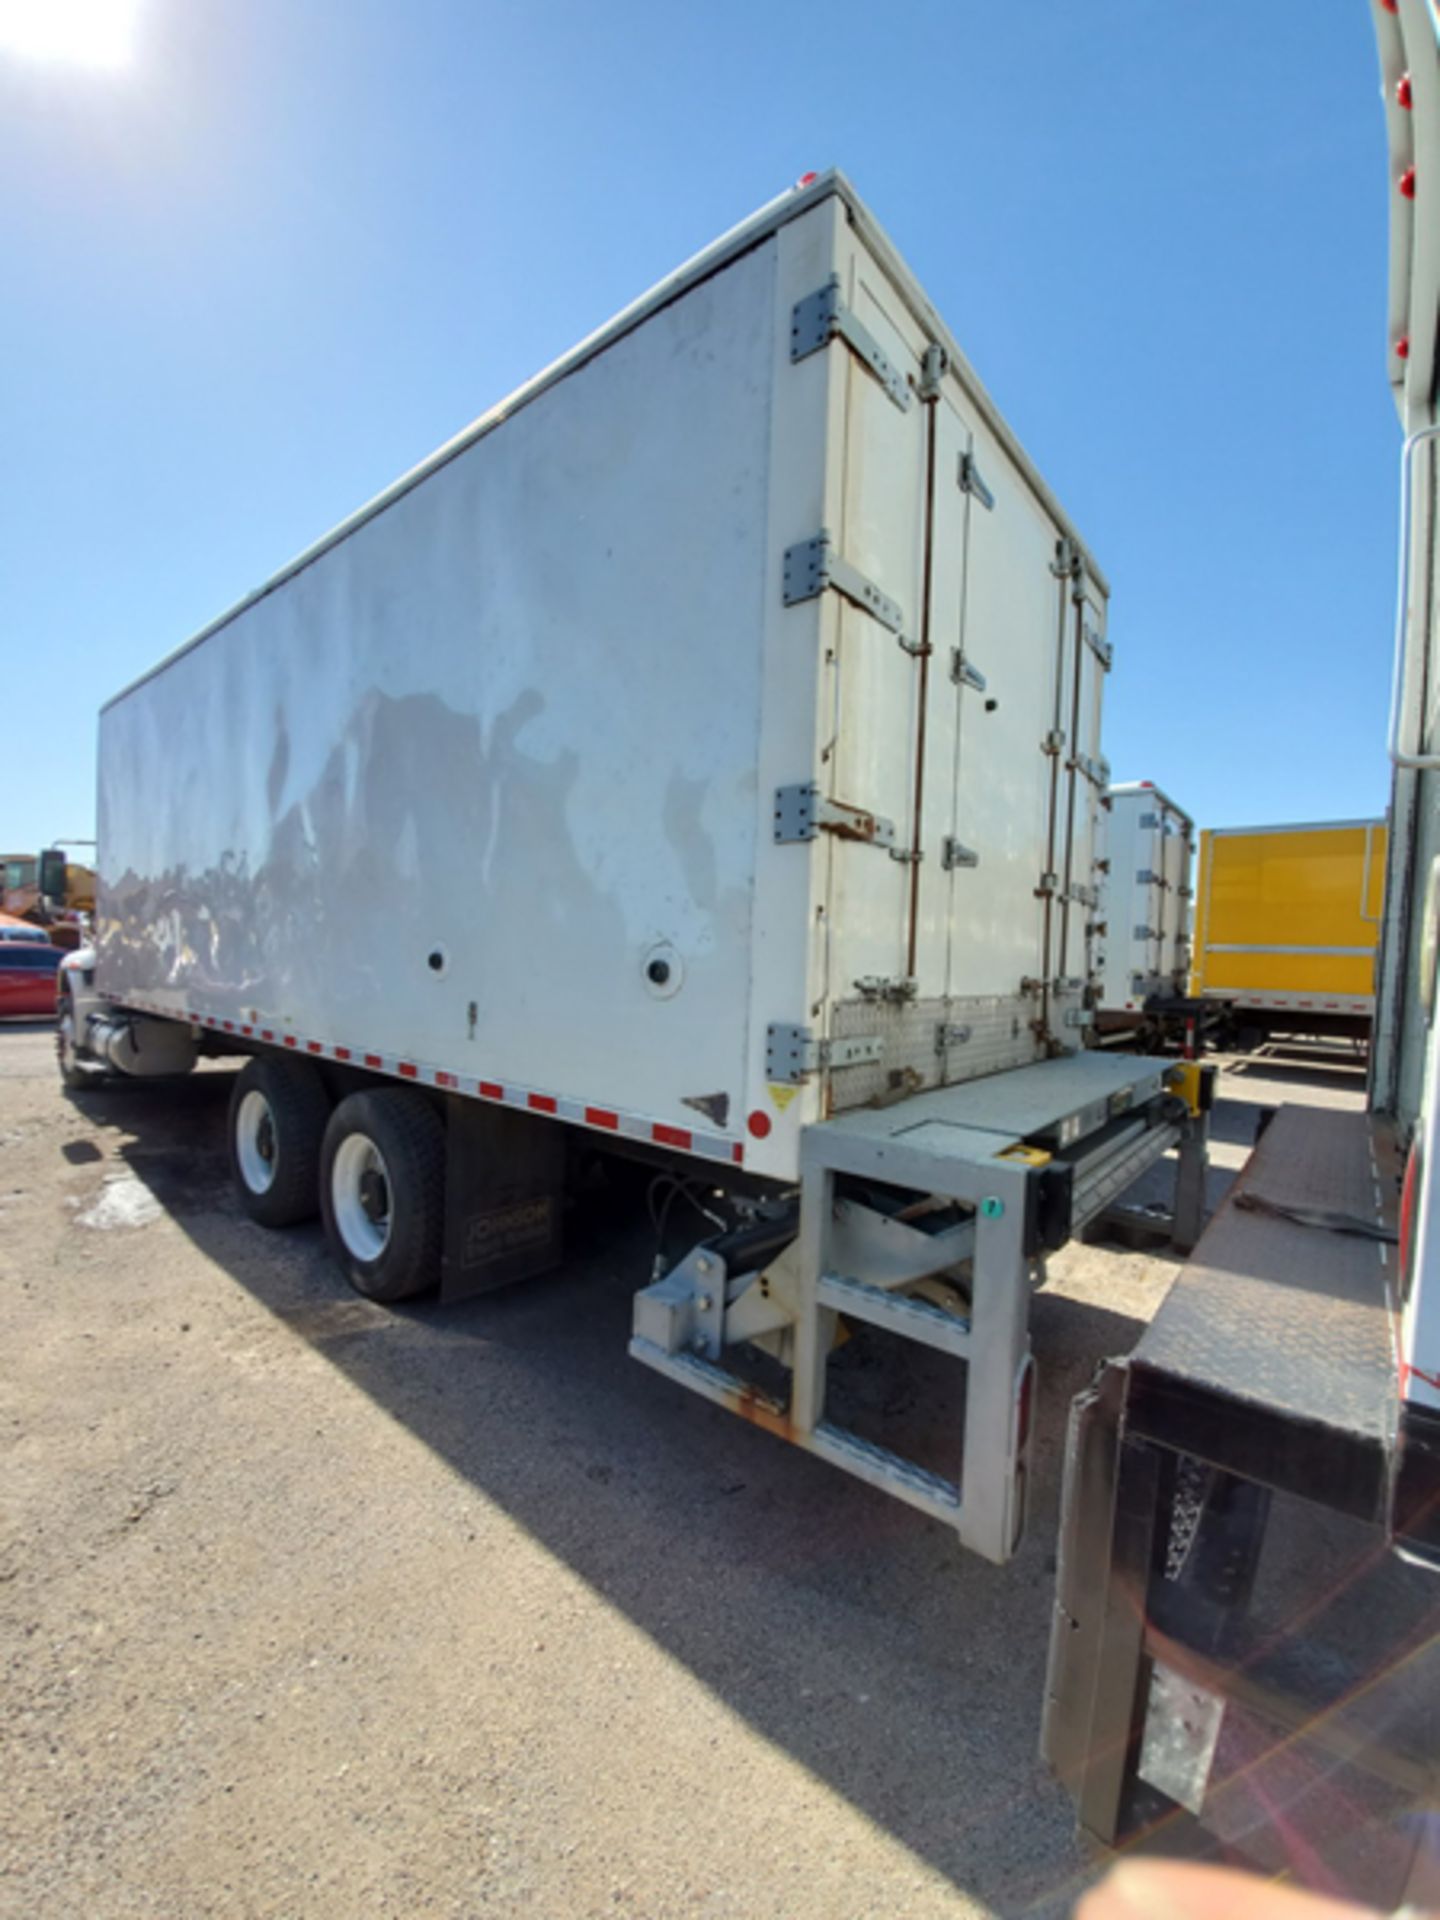 2018 INTERNATIONAL 4400 SBA 6X4 REFRIGERATED BOX TRUCK VIN#: 1HTMSTAR6JH529758, Approx Miles: 42969, - Image 4 of 9